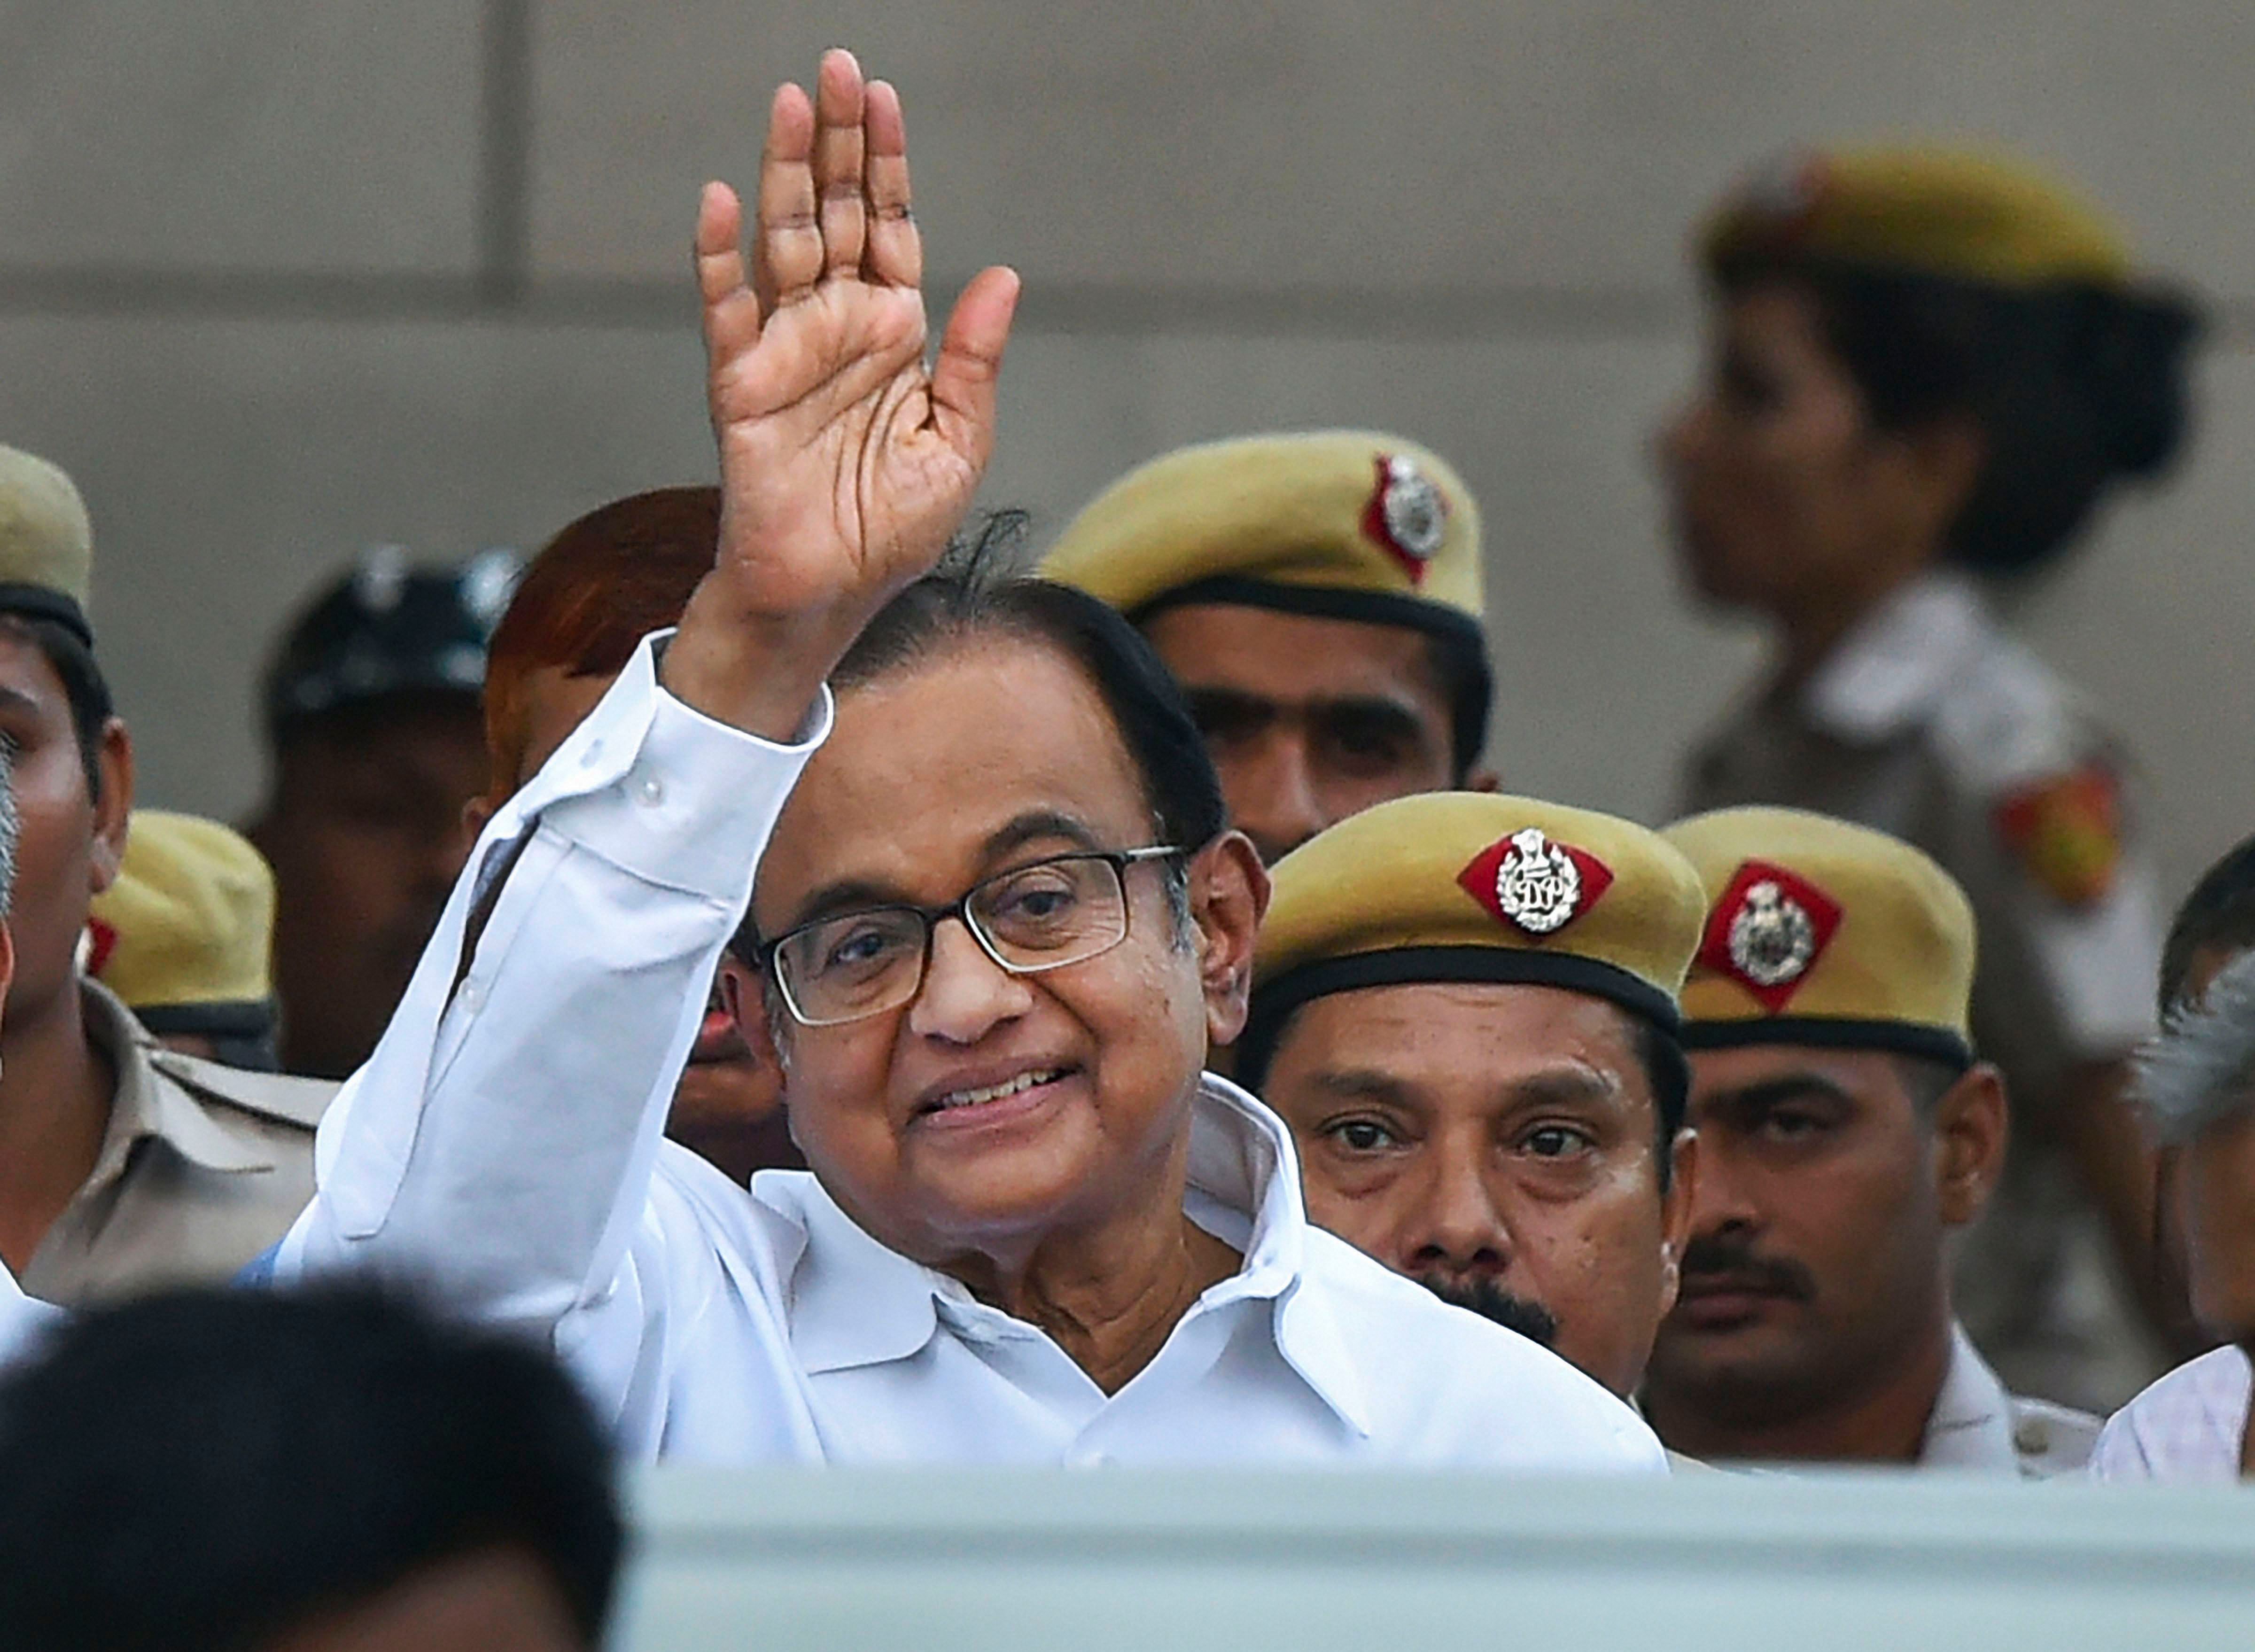 P Chidambaram was finance minister, Abhishek was chairman of the Forward Markets Commission and Krishnan an additional secretary and joint secretary in the Ministry of Finance when the scam came to light in 2012-13. Credit: PTI File Photo